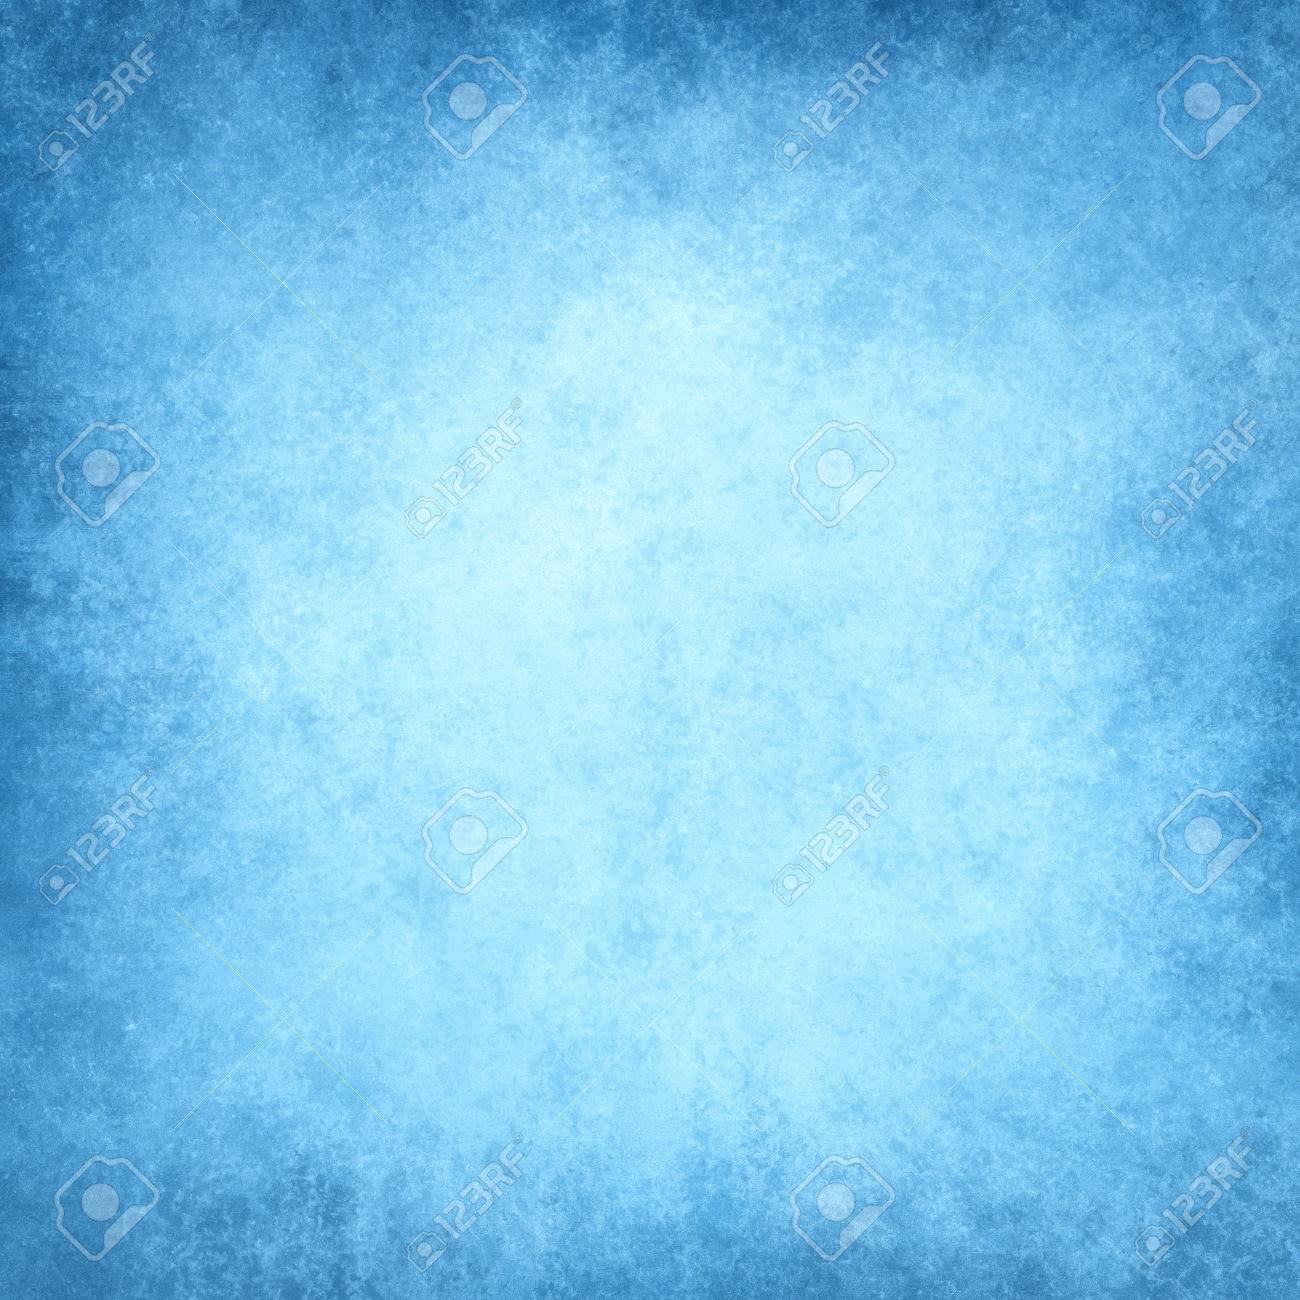 Abstract Sky Blue Background Or Paper With Brighter Center